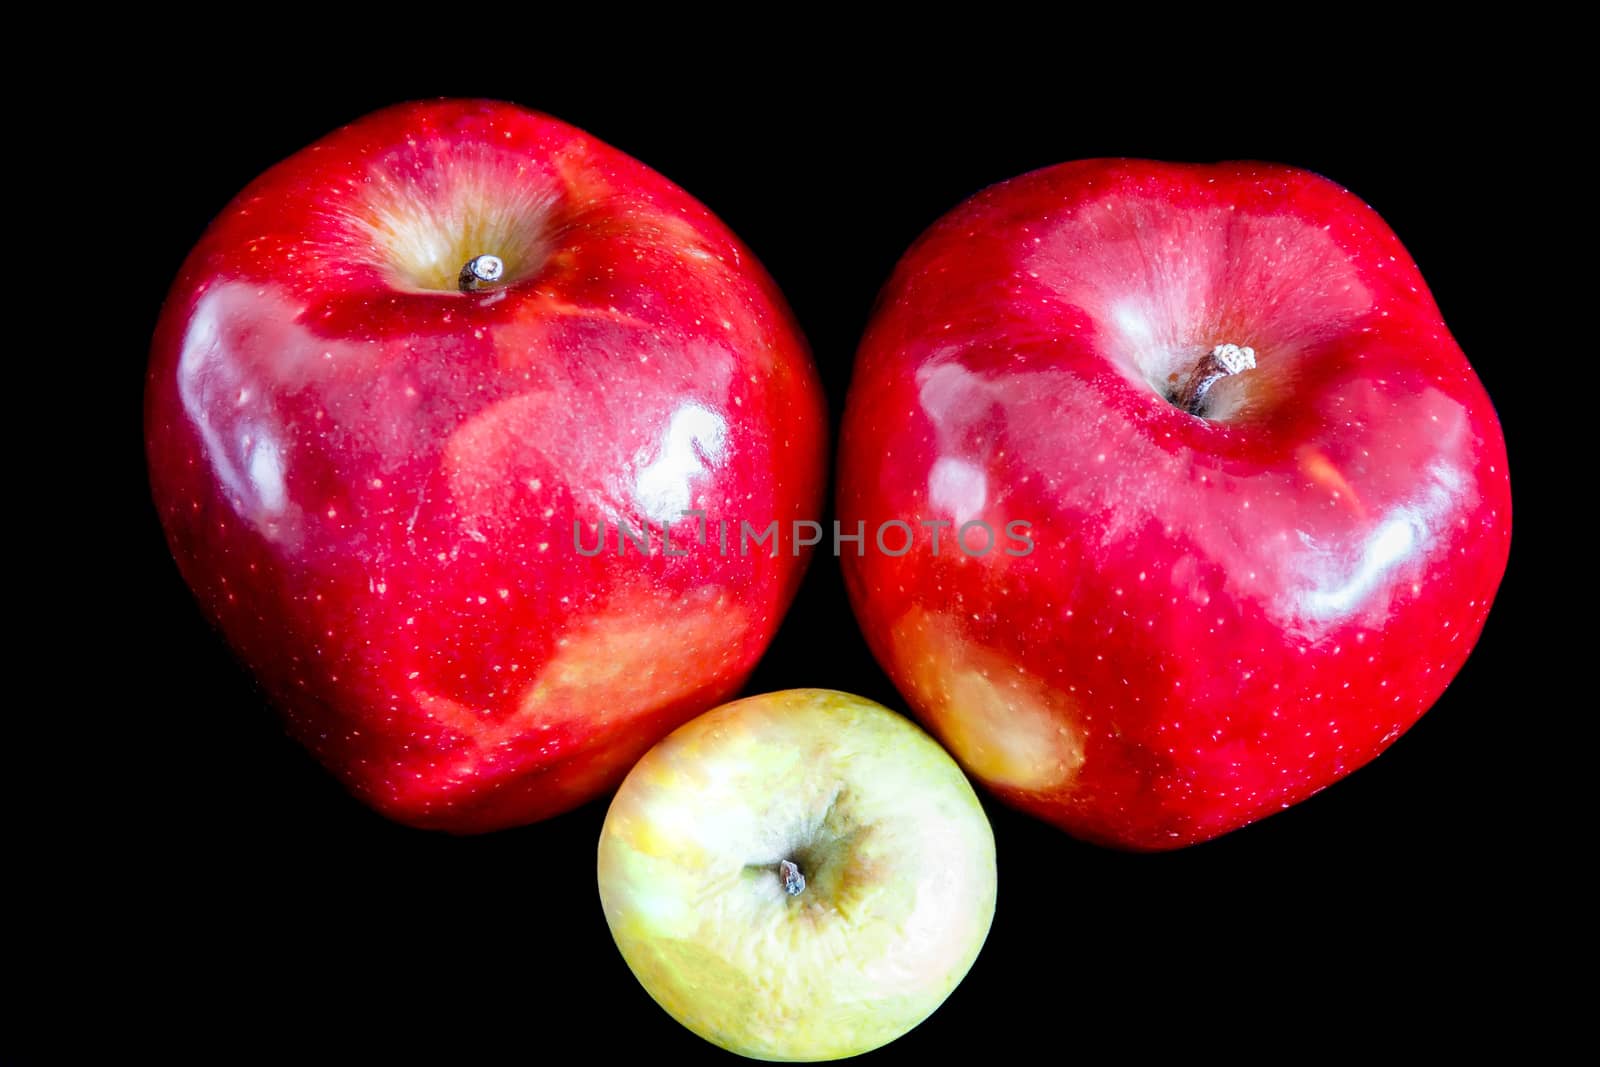 Two big red ripe appetizing apples on black background and one wrinkled green